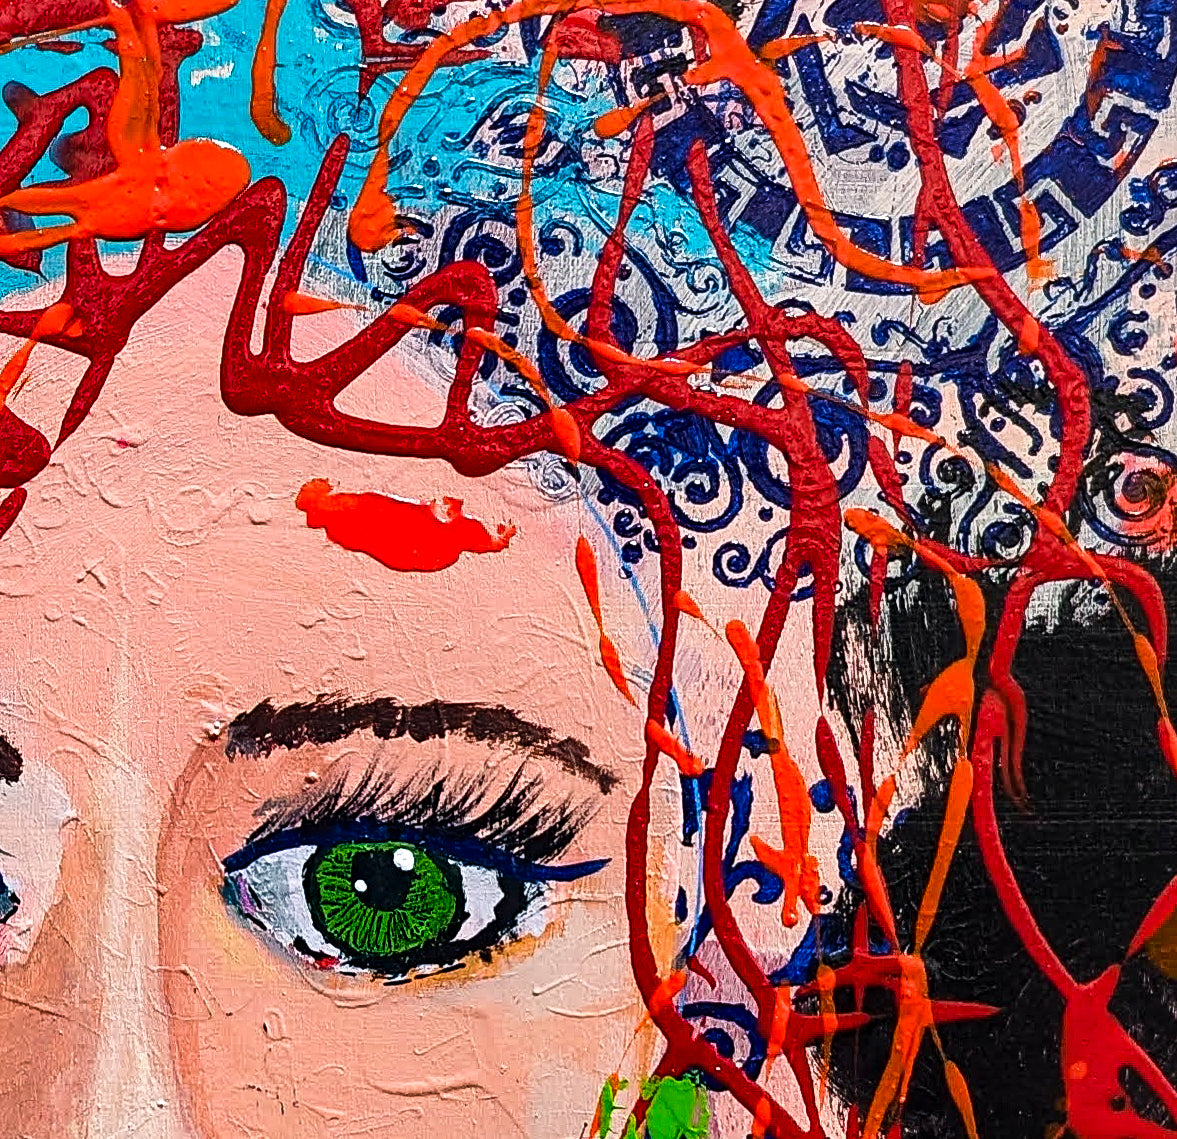 A close up look at Wistful's locks, red squiggles of paint on top of mixed media stencils in shades of blue.